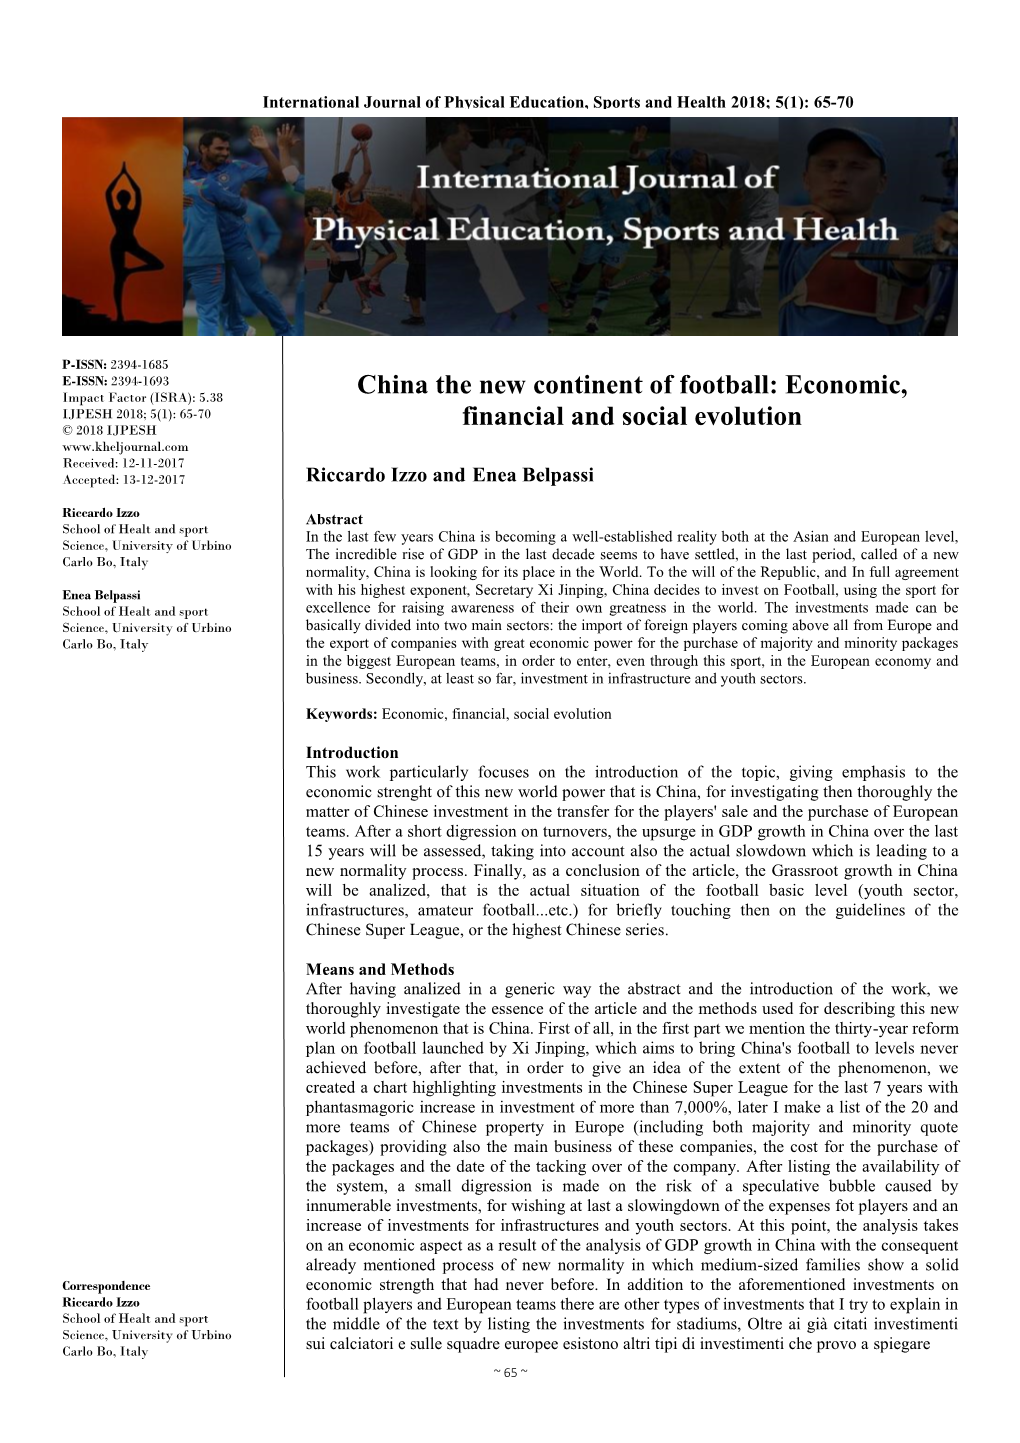 China the New Continent of Football: Economic, Financial and Social